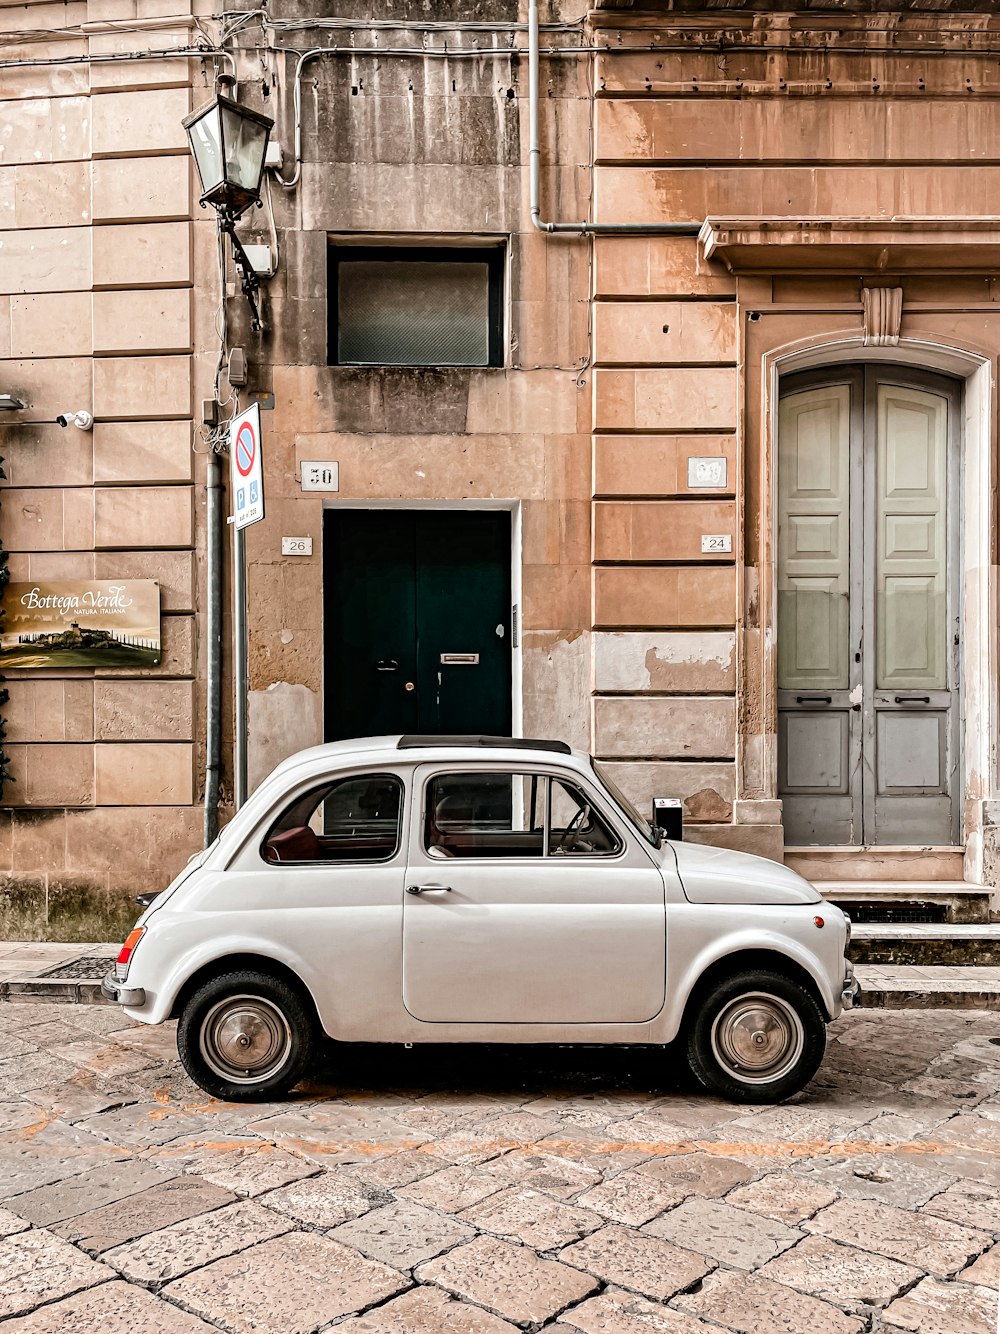 a small white car parked in front of a building